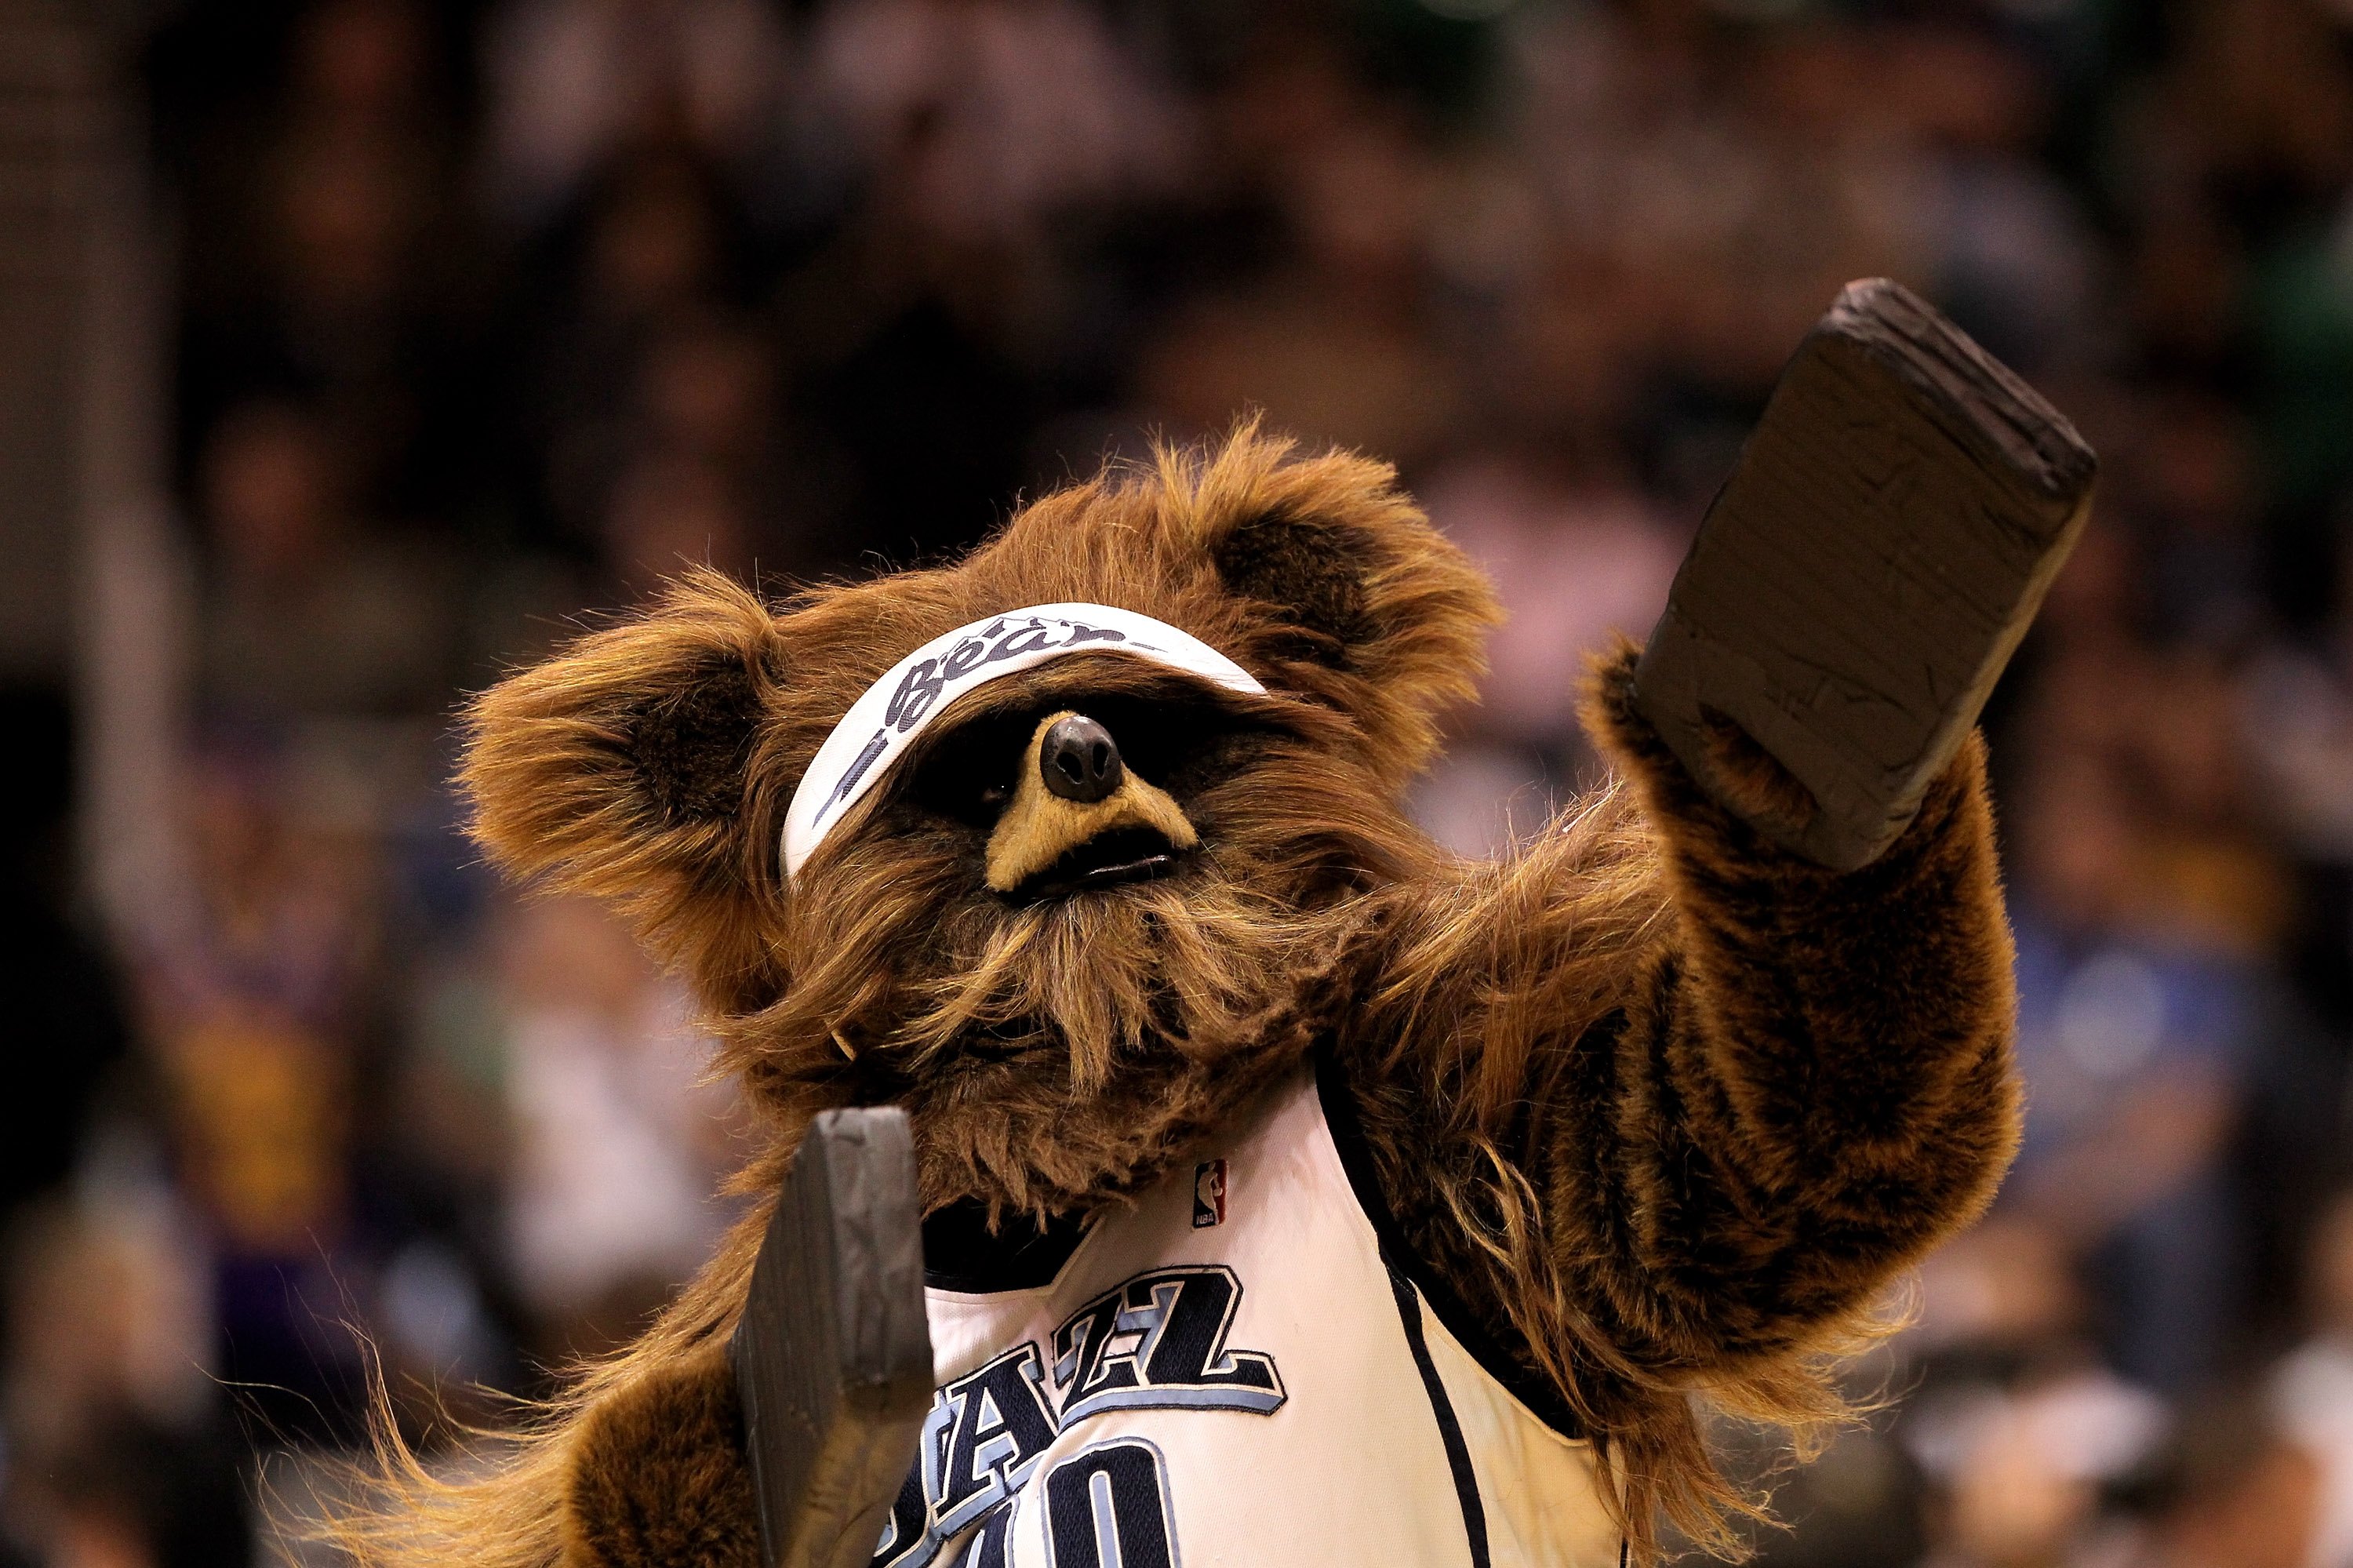 SALT LAKE CITY - APRIL 30:  The Utah Jazz mascot, Bear, performs during a time out of their game against the Denver Nuggets during Game Six of the Western Conference Quarterfinals of the 2010 NBA Playoffs at EnergySolutions Arena on April 30, 2010 in Salt